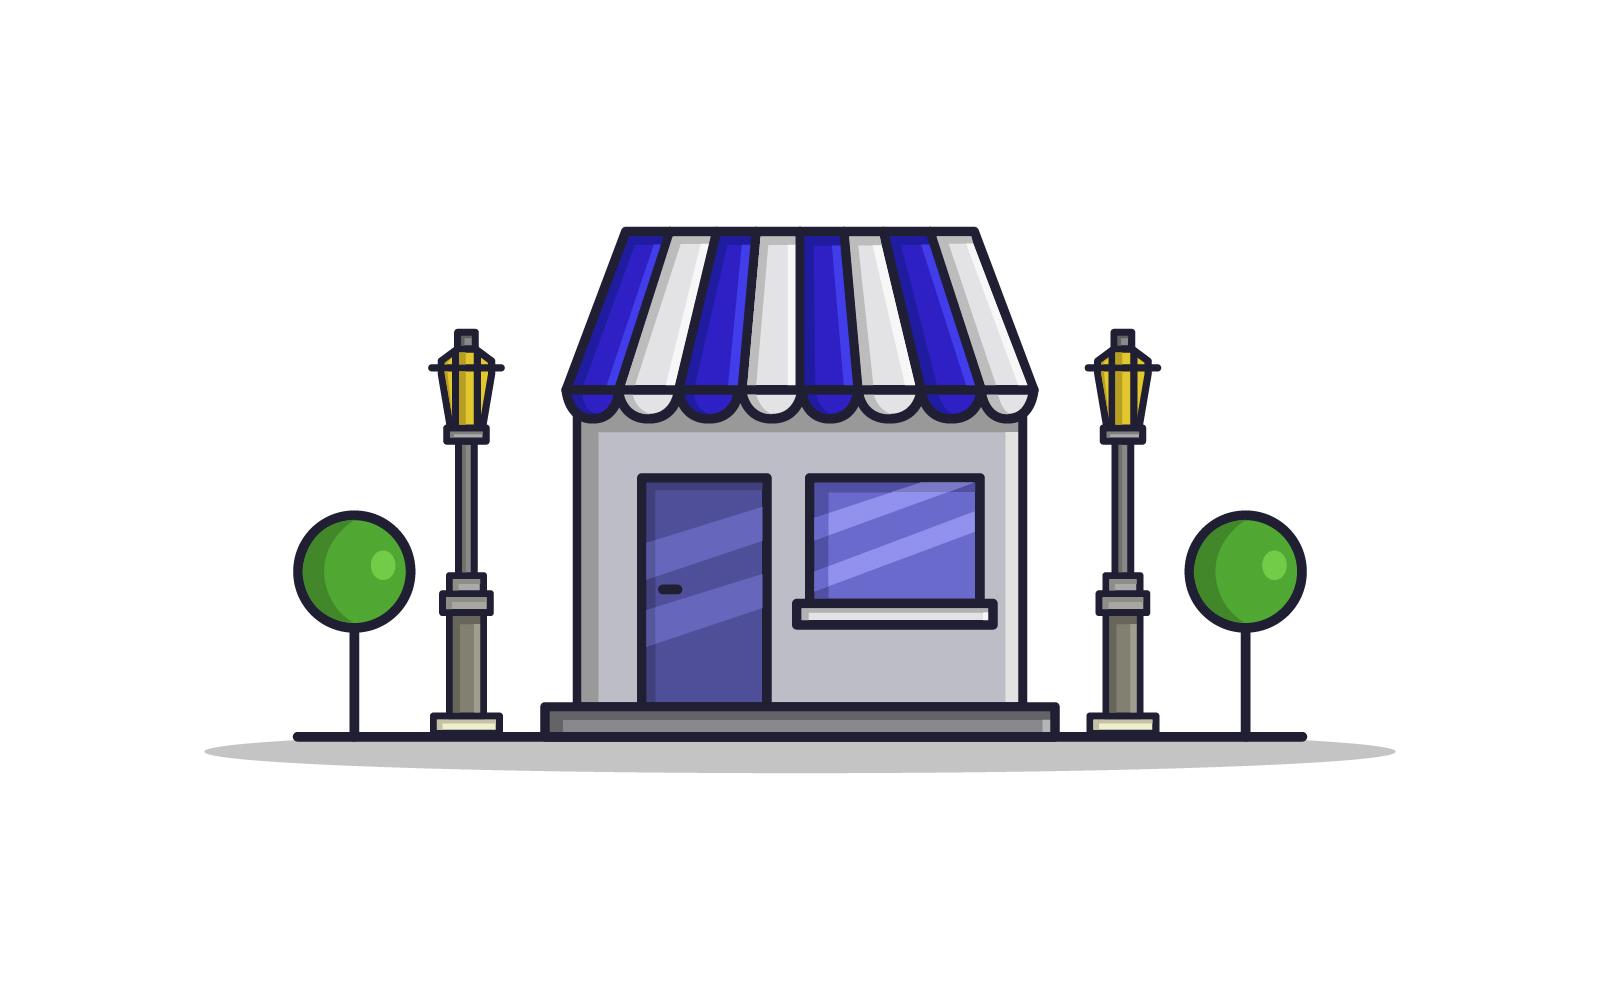 Shop illustrated in vector on background